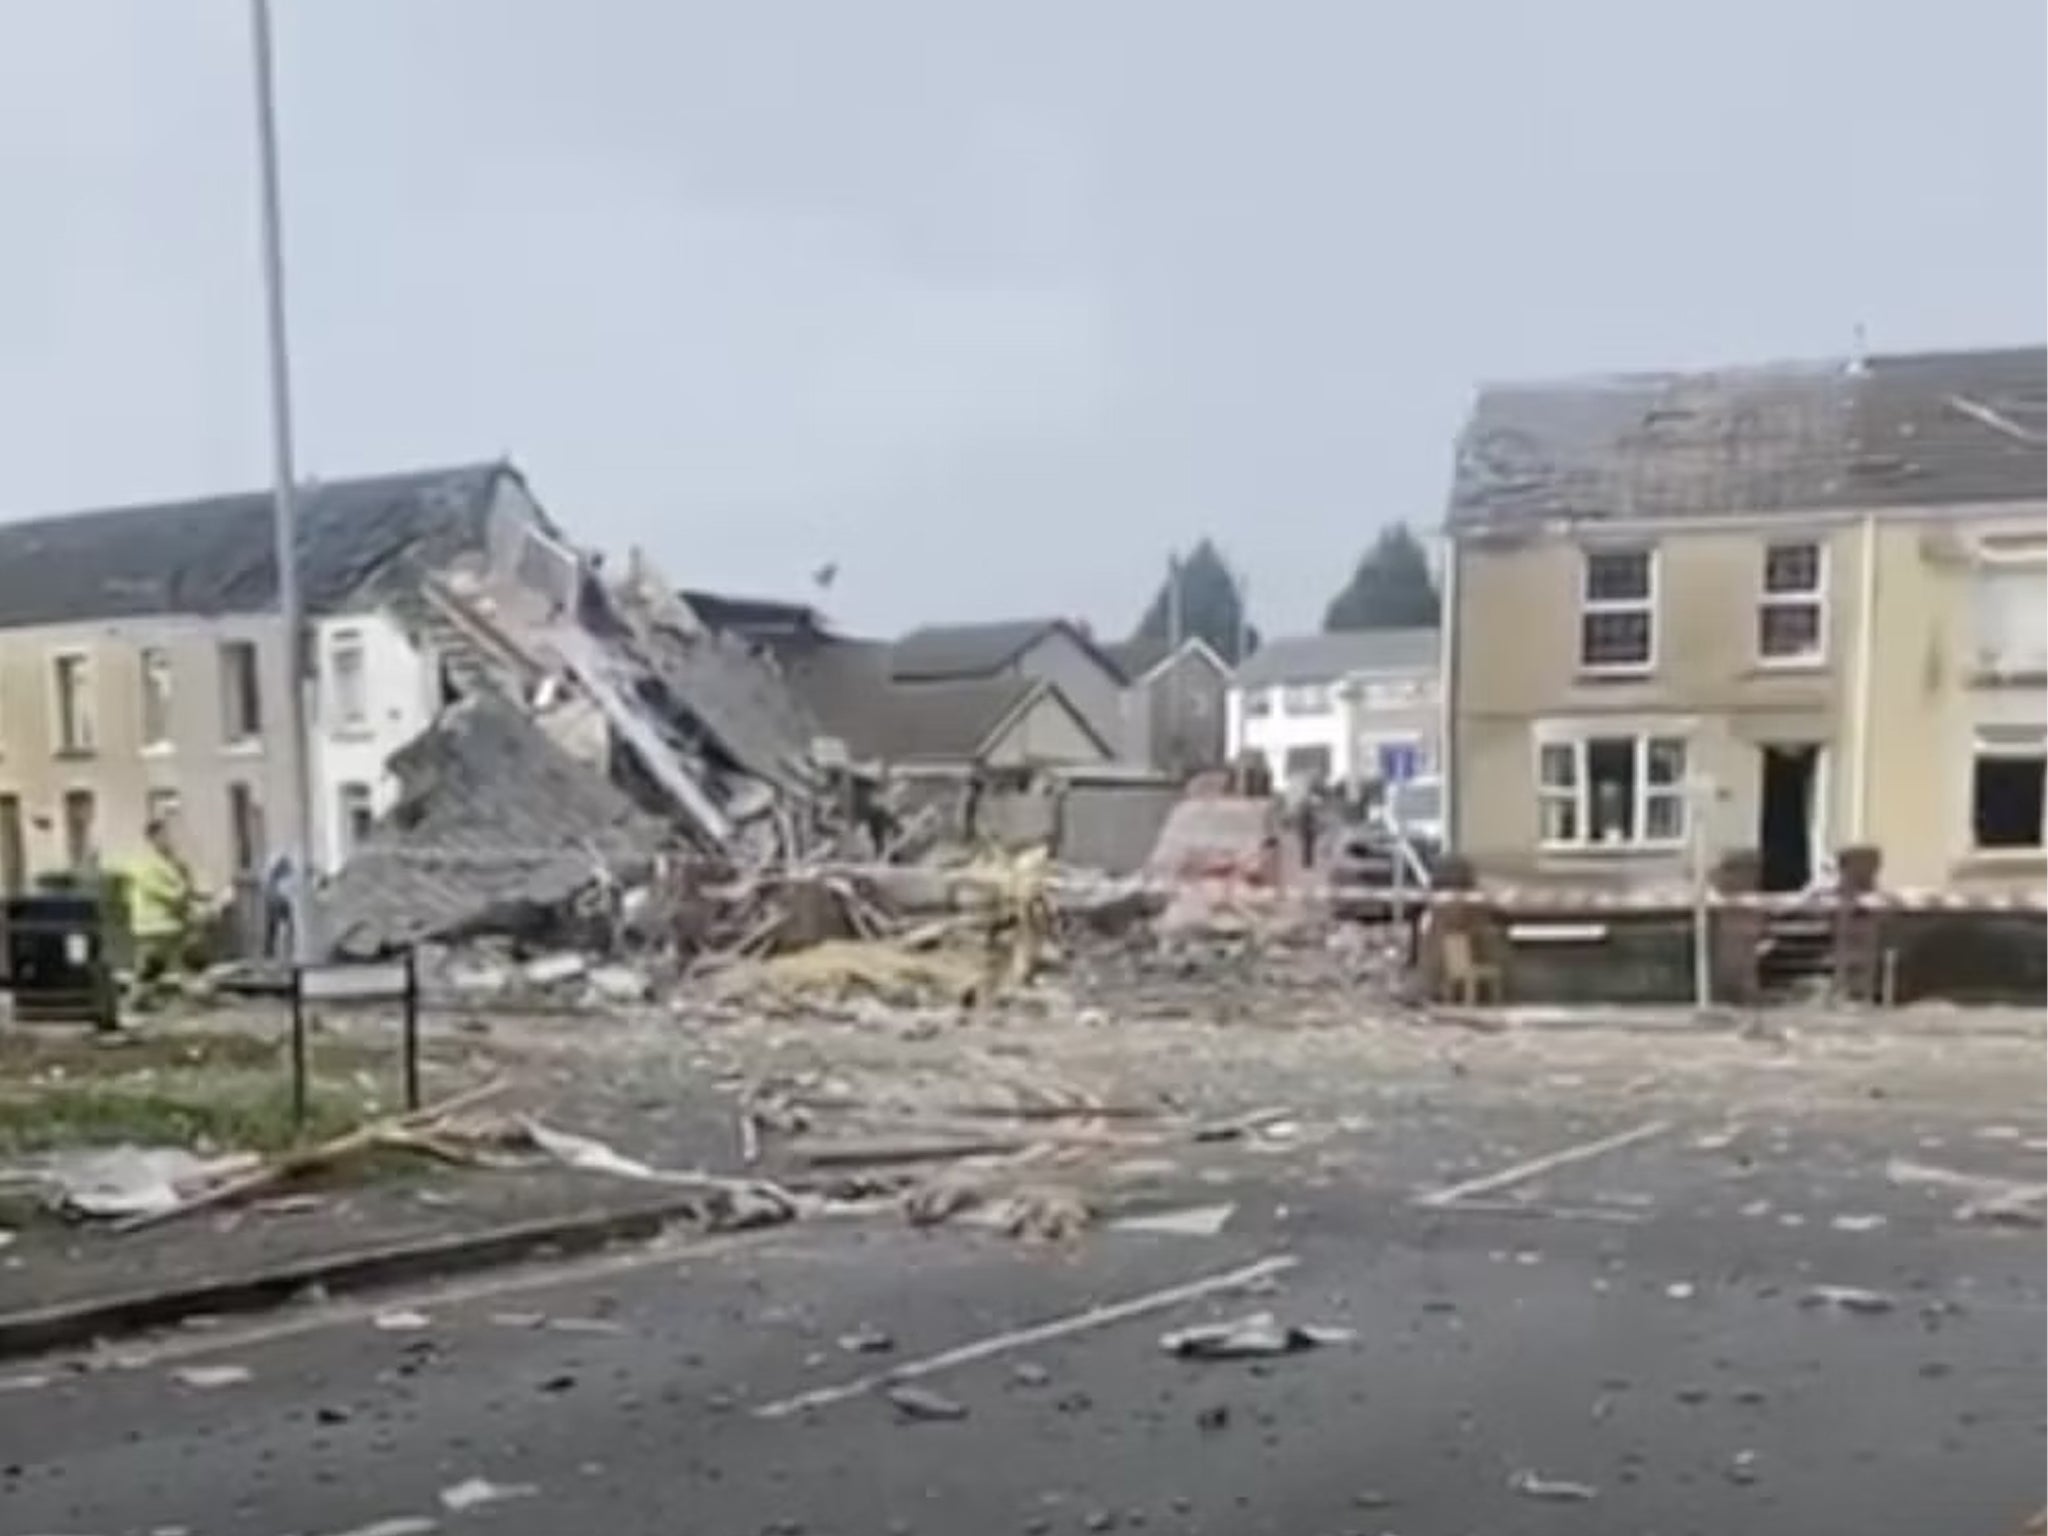 A major incident was declared in Morriston, Swansea after an explosion ripped through a home